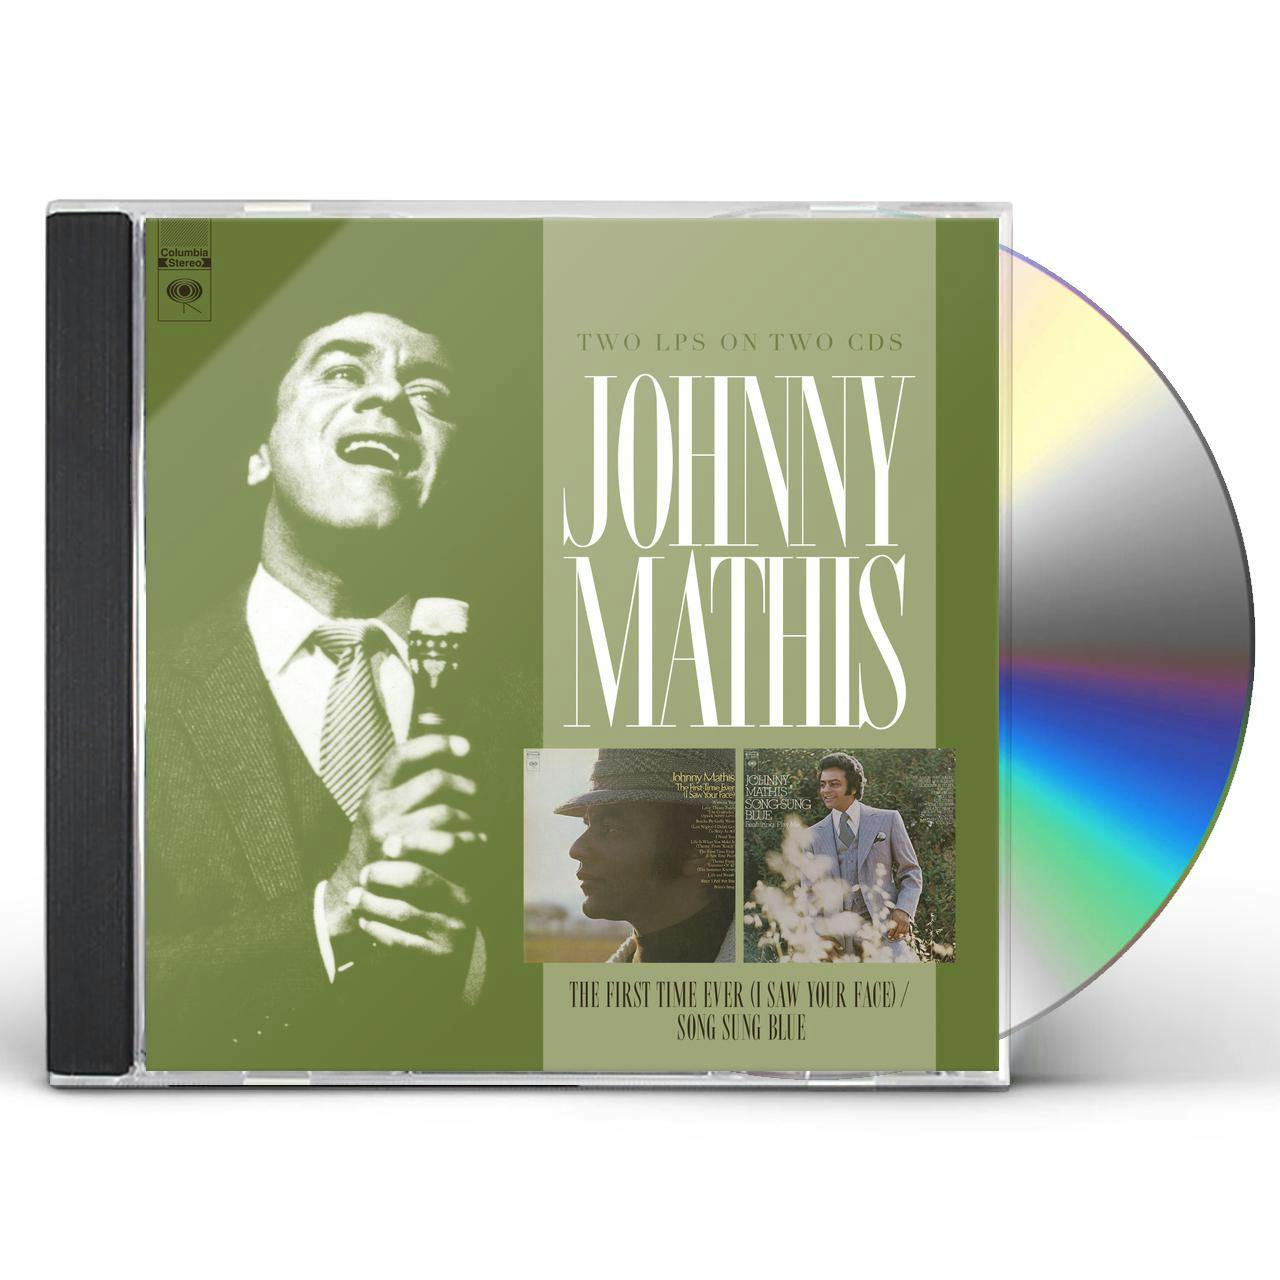 Johnny Mathis FIRST TIME EVER (I SAW YOUR FACE) CD